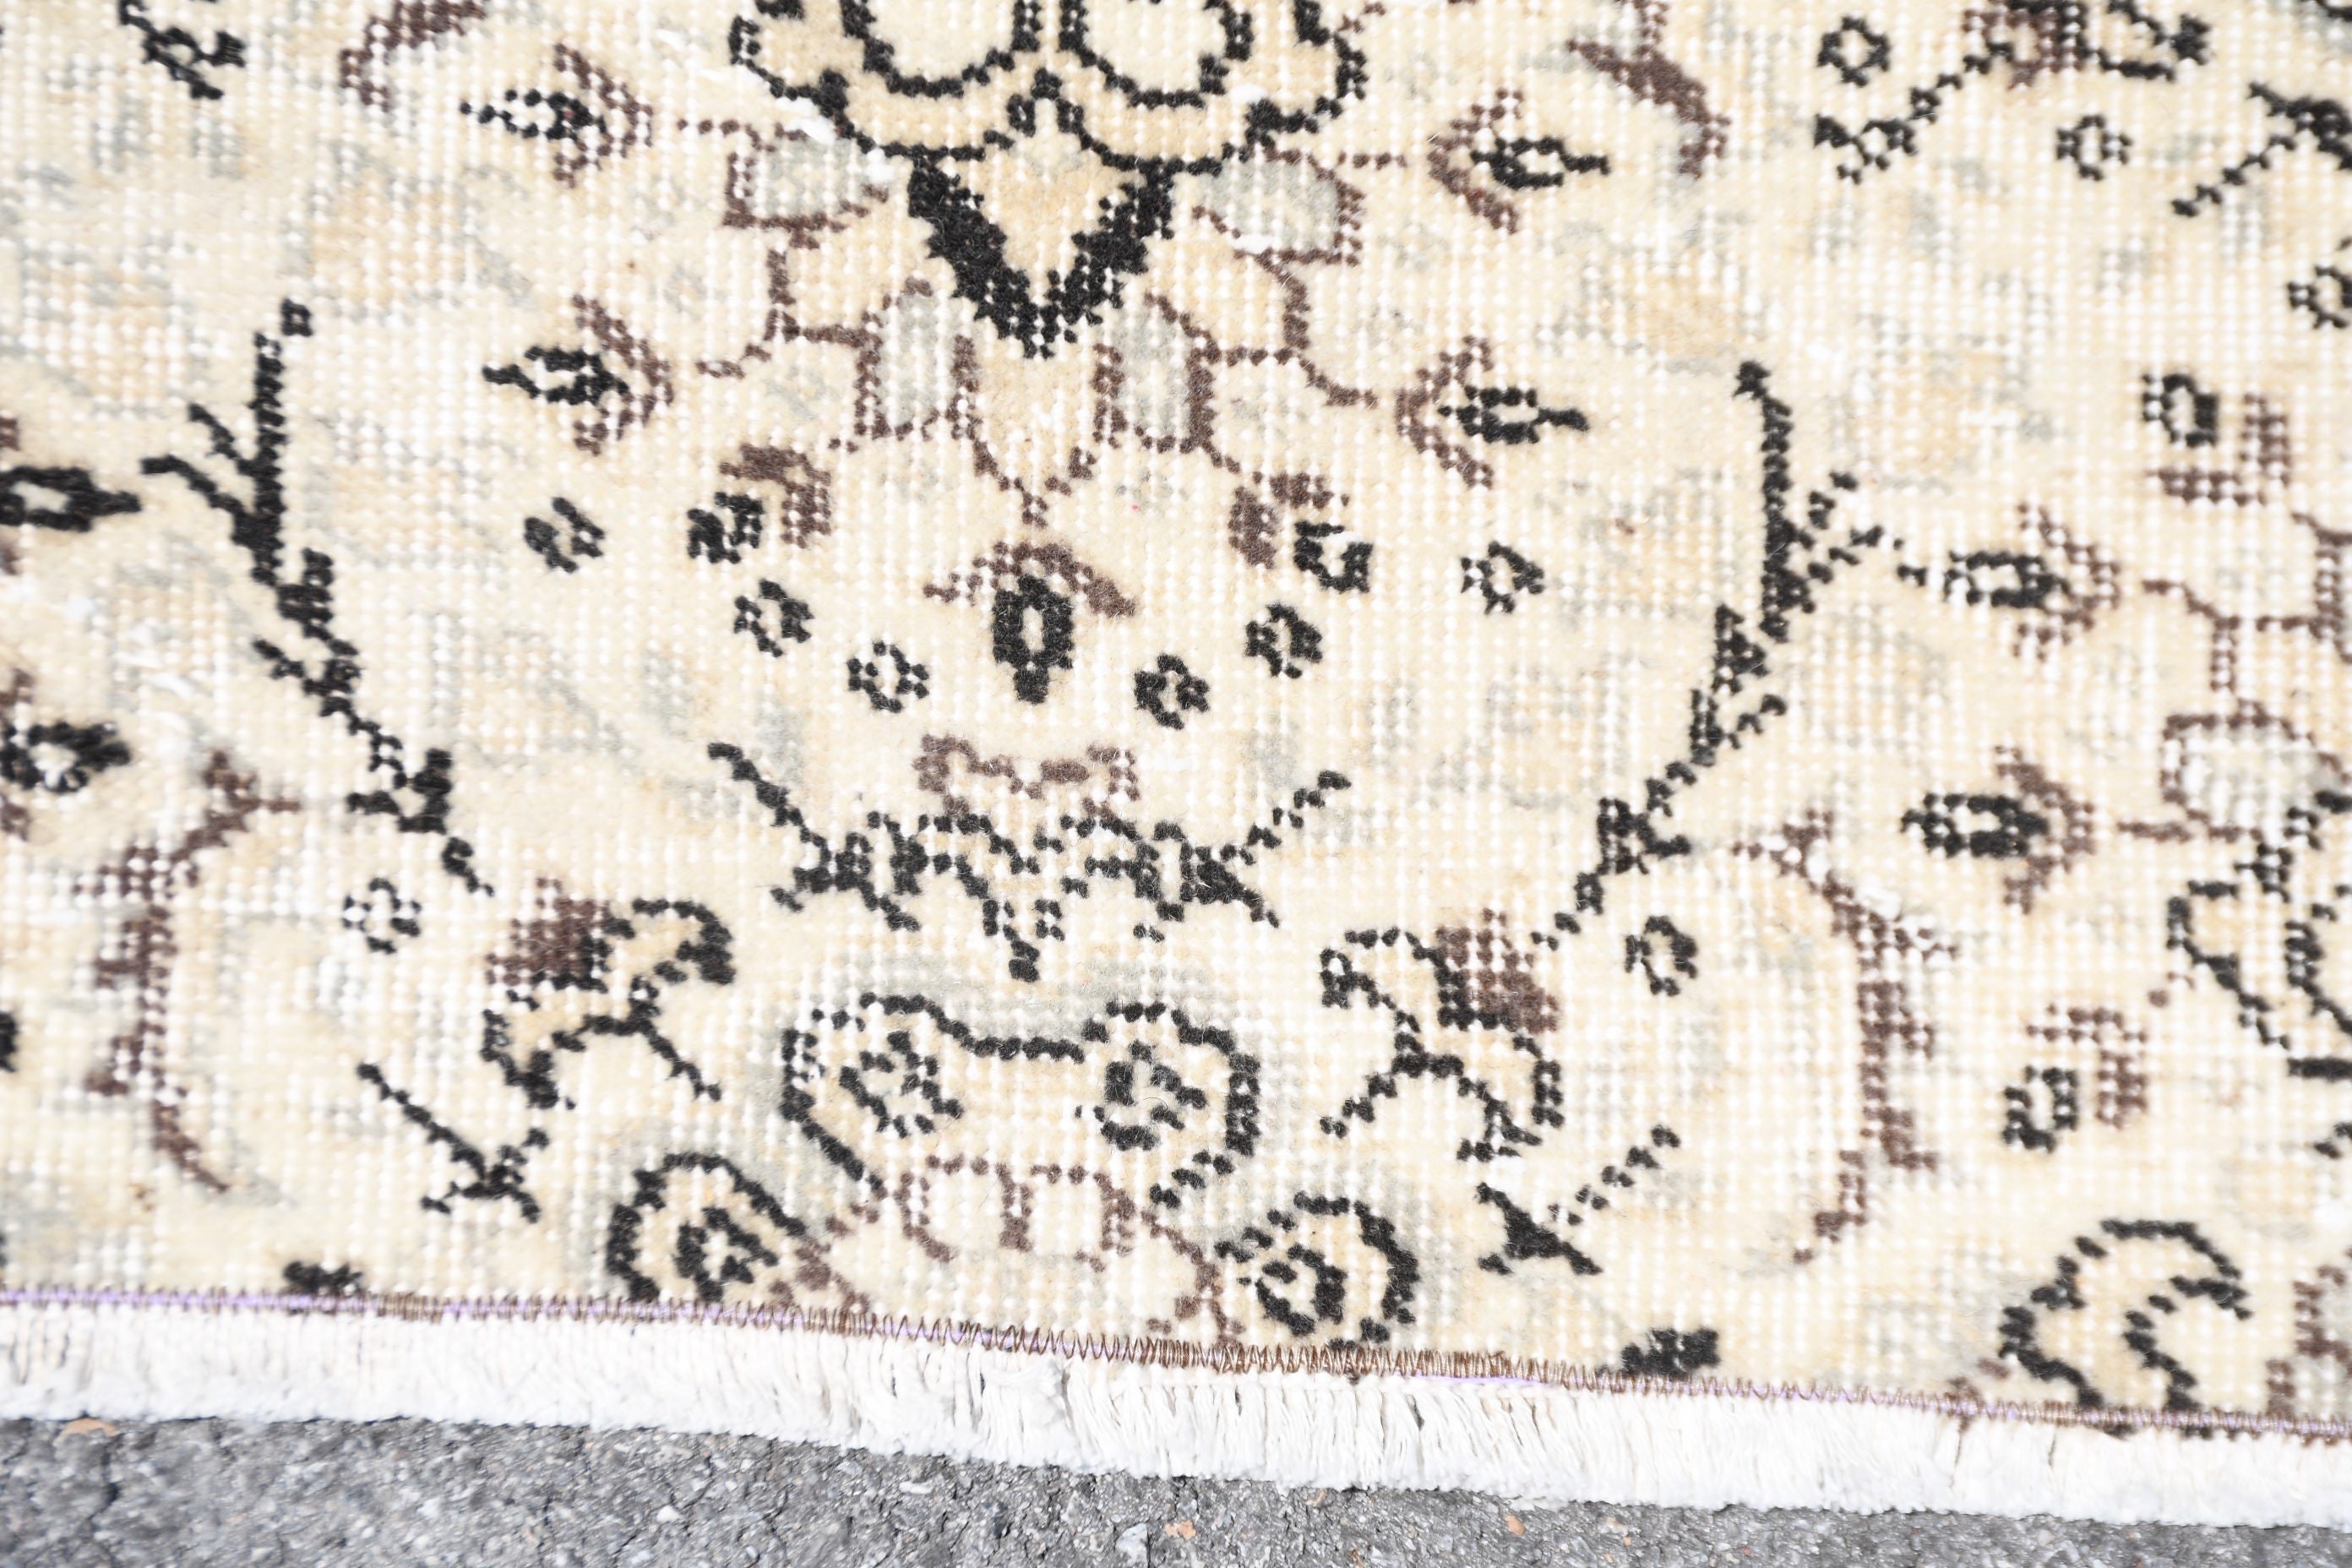 Rugs for Kitchen, Home Decor Rug, 3.4x6.9 ft Accent Rug, Vintage Rugs, Entry Rug, Turkish Rugs, Beige Moroccan Rug, Wool Rug, Bedroom Rug